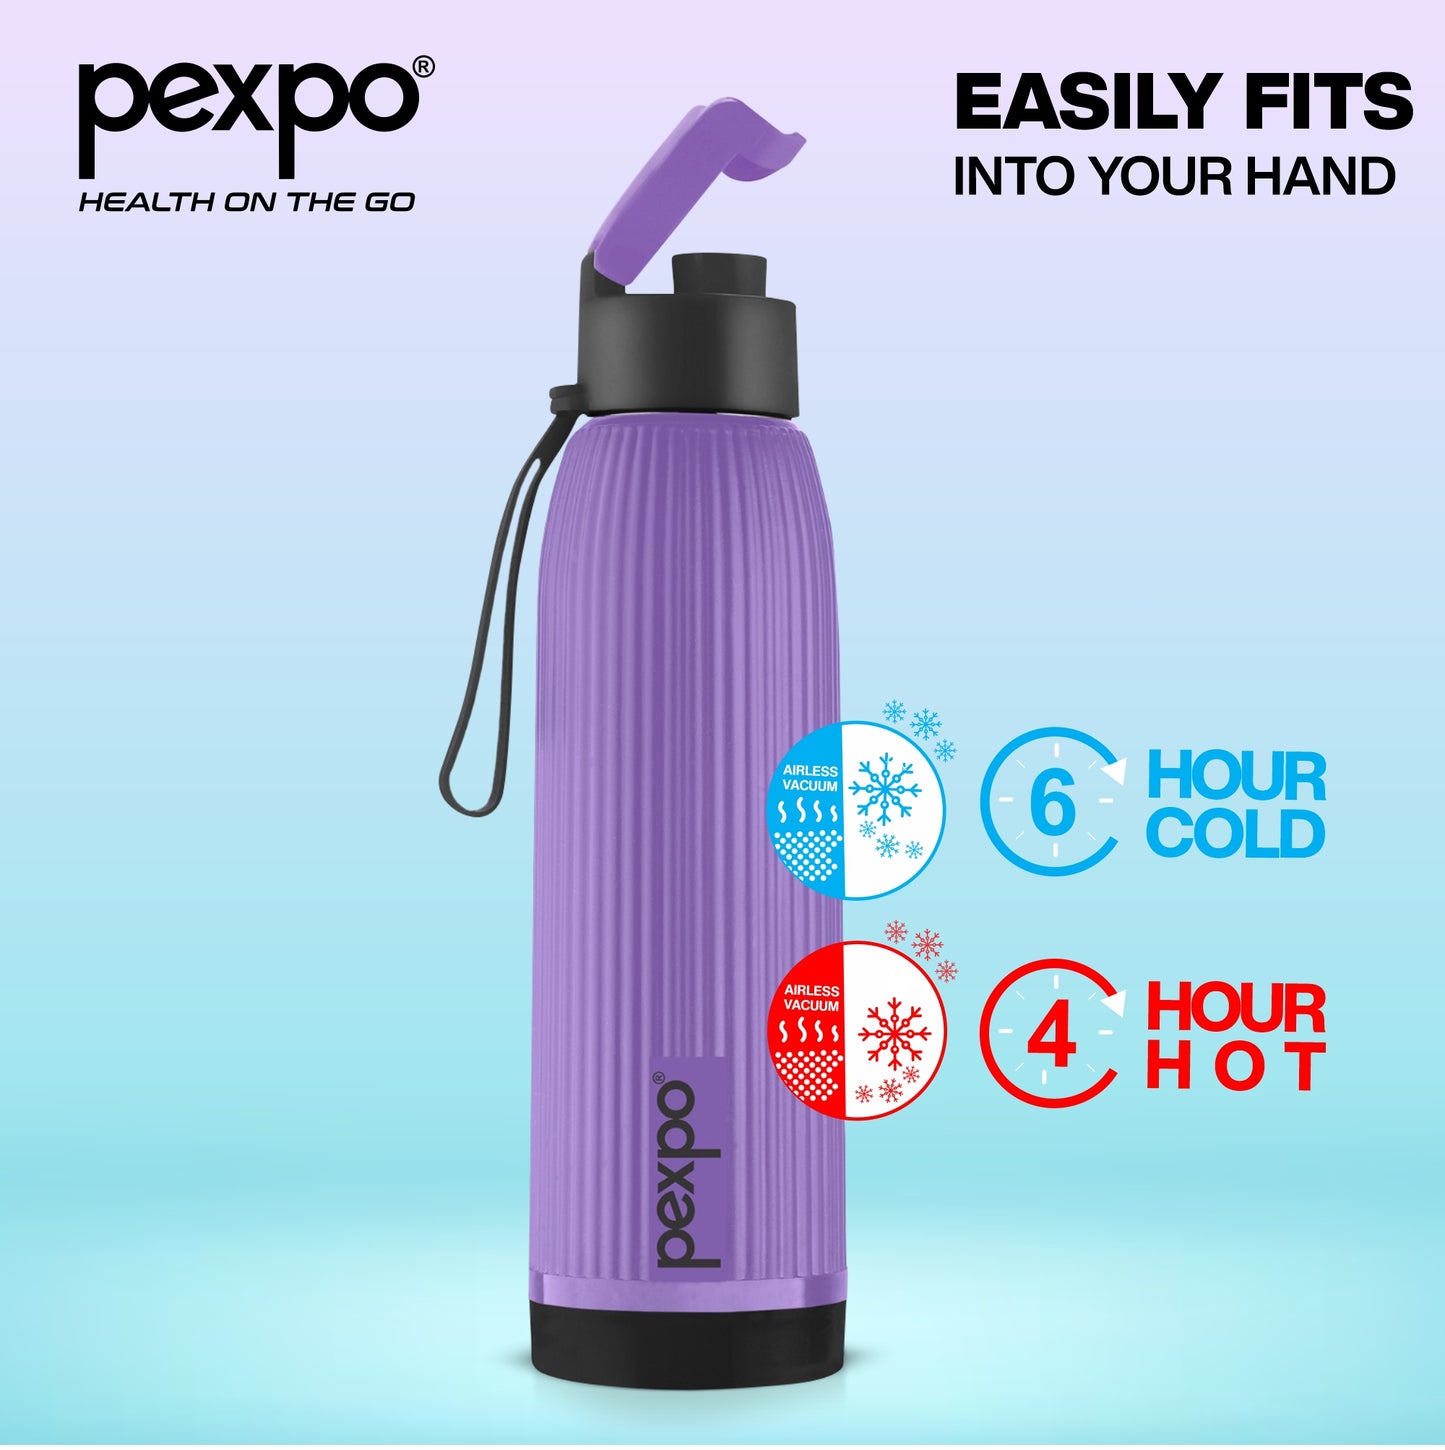 Pexpo Easy Sip- PU Insulated 4 Hours Warm & Cold | Safe & Portable (Stainless Steel)